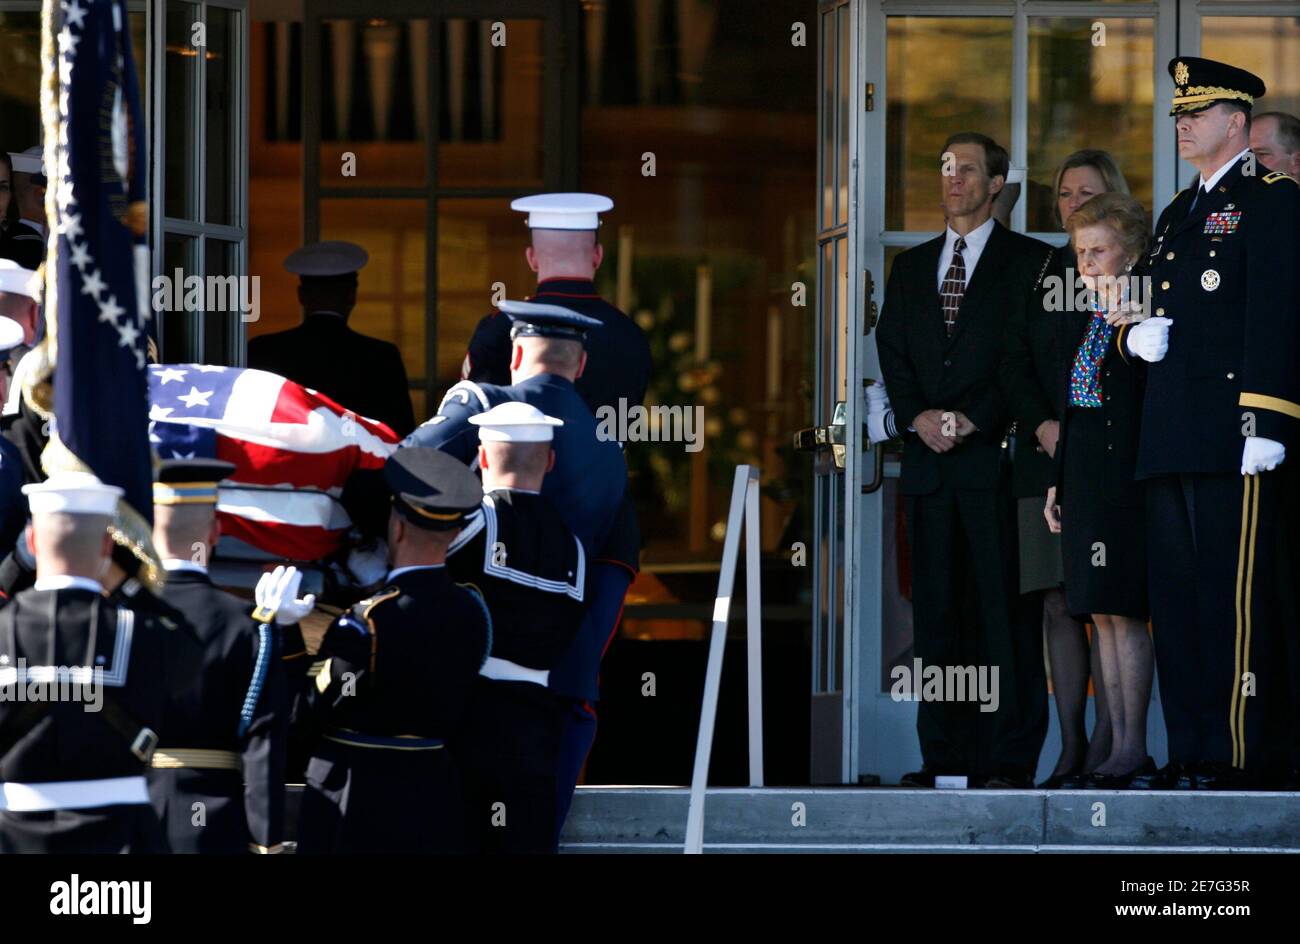 A Military Honor guard carries the casket of former U.S. President Gerald Ford past his wife Betty (2nd R), son Michael (4th R) and daughter Susan (3rd R) during State funeral ceremonies at St. Margaret's Episcopal Church in Palm Desert, California December 29, 2006. Escorting the former first lady is Major General Guy C. Swan III (R), Commanding General Joint Task Force. Ford died at age 93 on Tuesday in Rancho Mirage, California.    REUTERS/Mike Blake  (UNITED STATES) Stock Photo